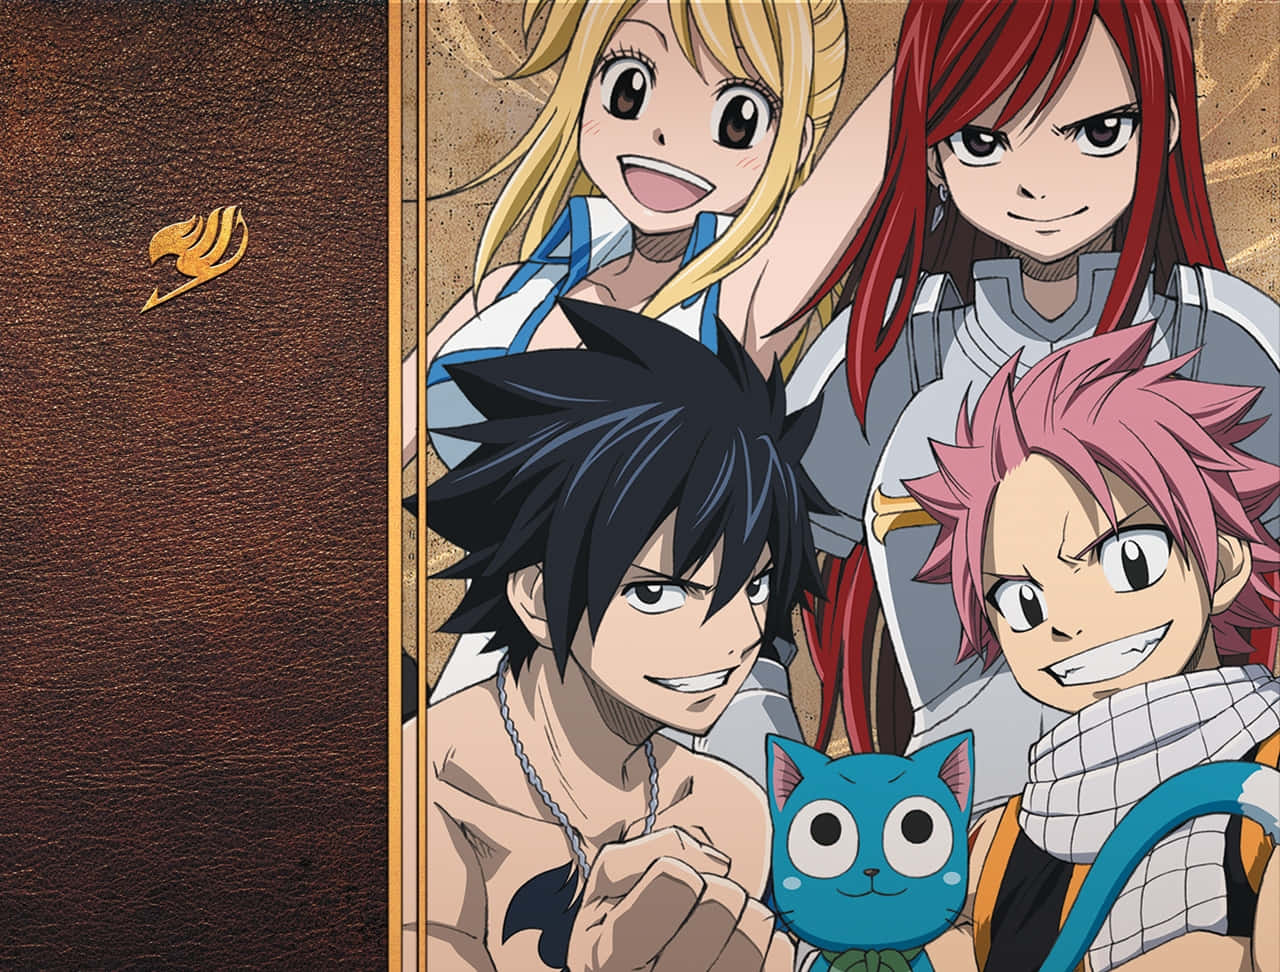 "Unleash the power of Fairy Tail!"